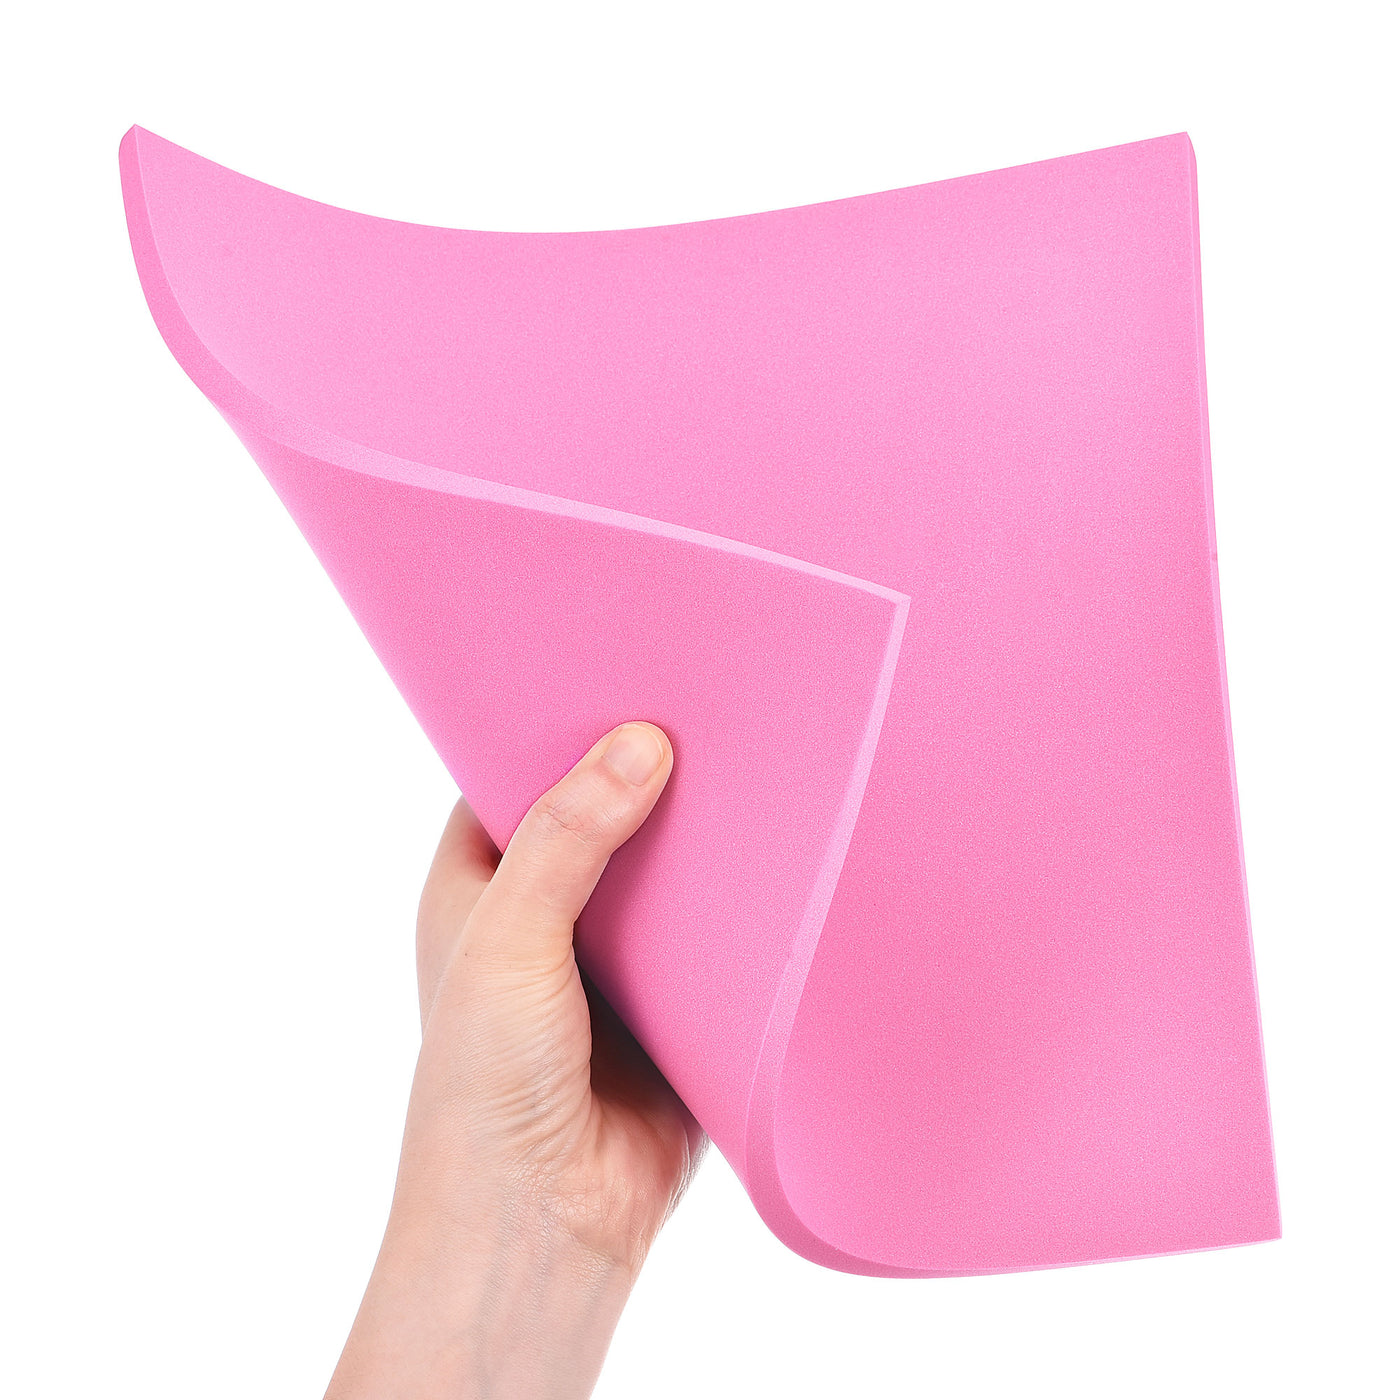 Uxcell Uxcell Pink EVA Foam Sheets 10 x 10 Inch 7mm Thickness for Crafts DIY Projects, 4 Pcs